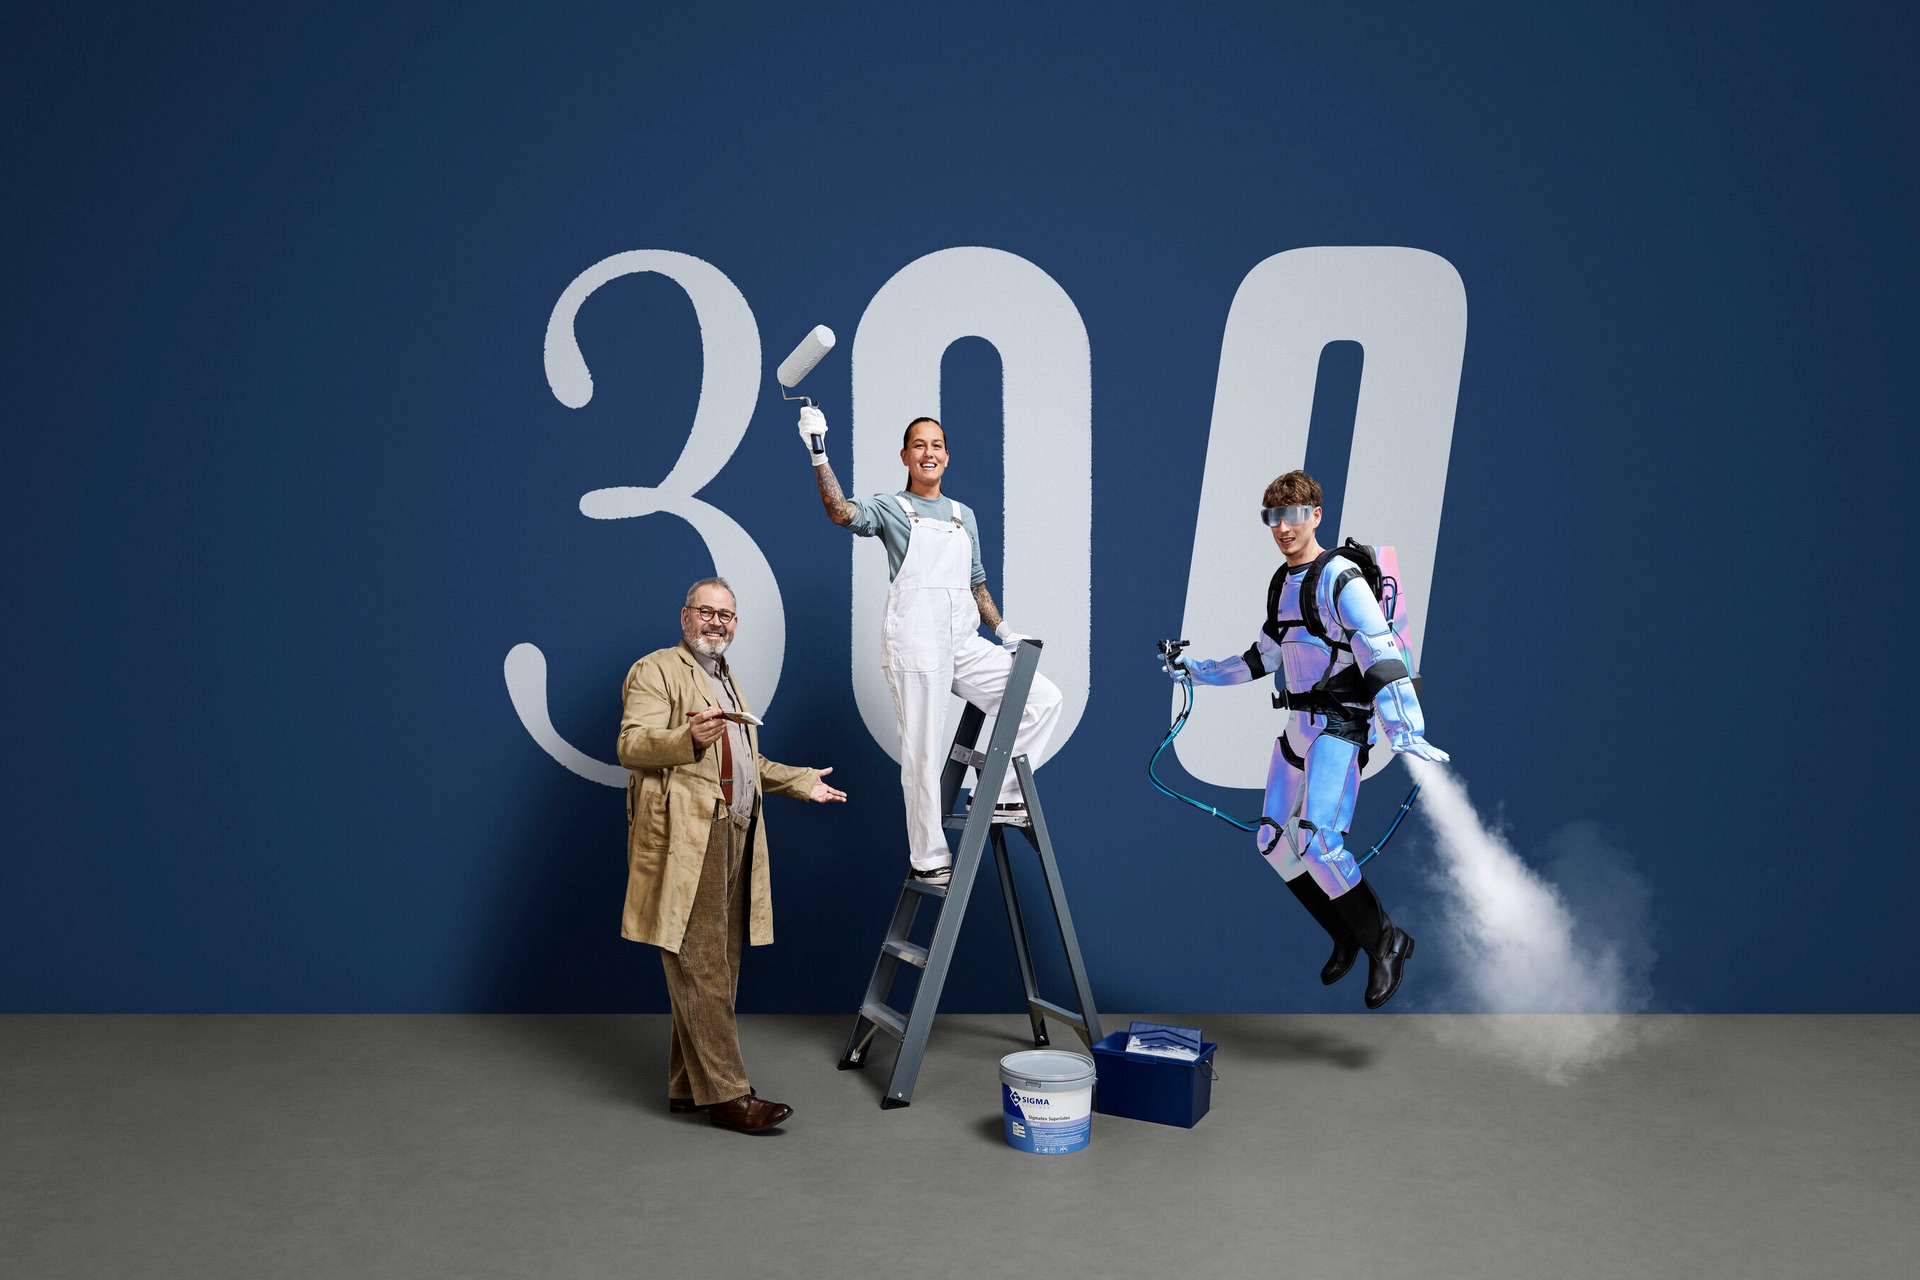 PPG Celebrates 300 Years Of Paint And Coatings Innovation In The Netherlands